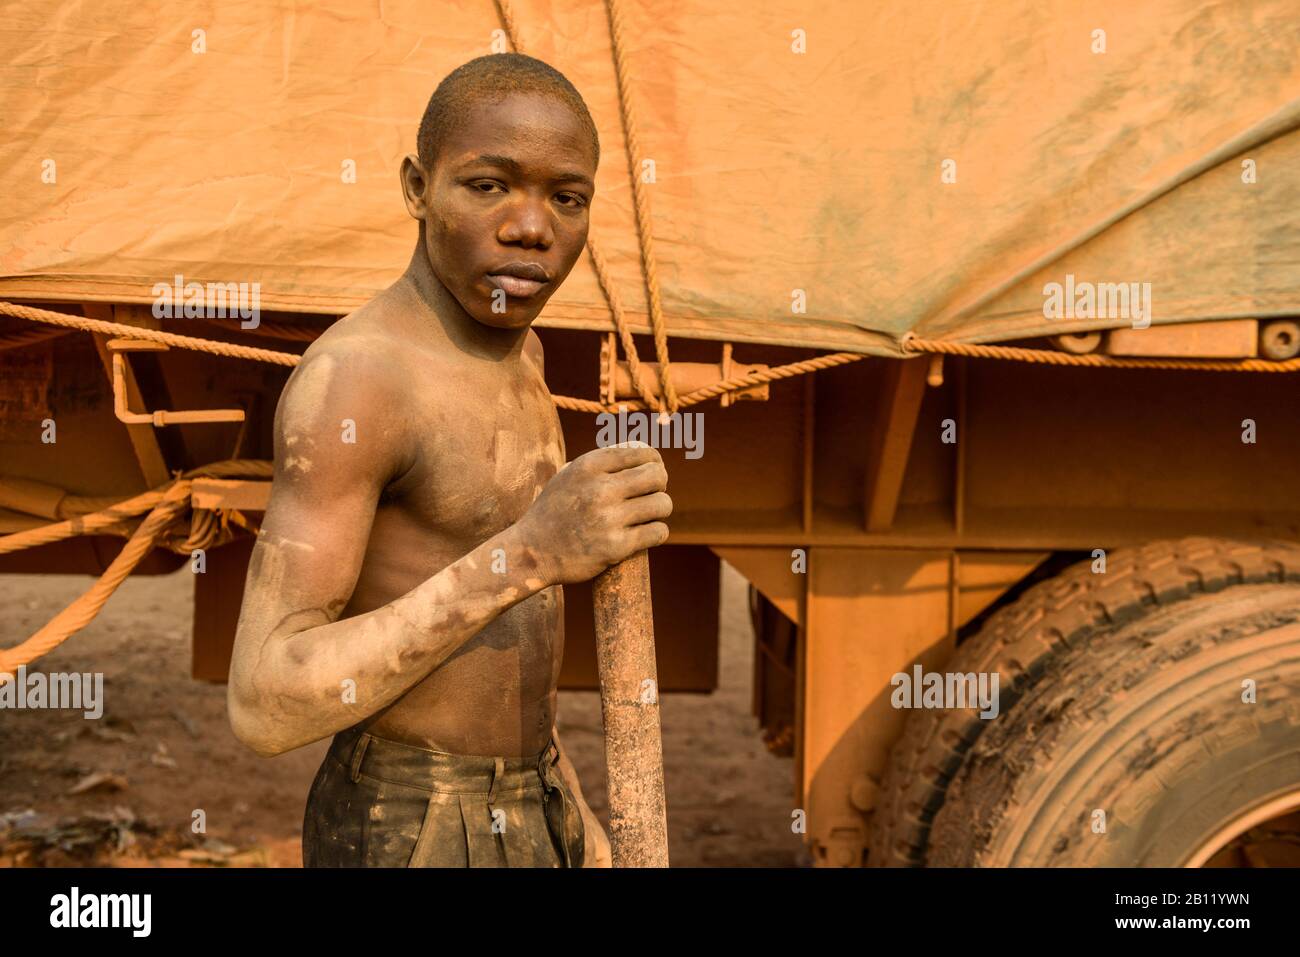 Congolese man repairs tires, southern half of the Democratic Republic of the Congo, Africa Stock Photo